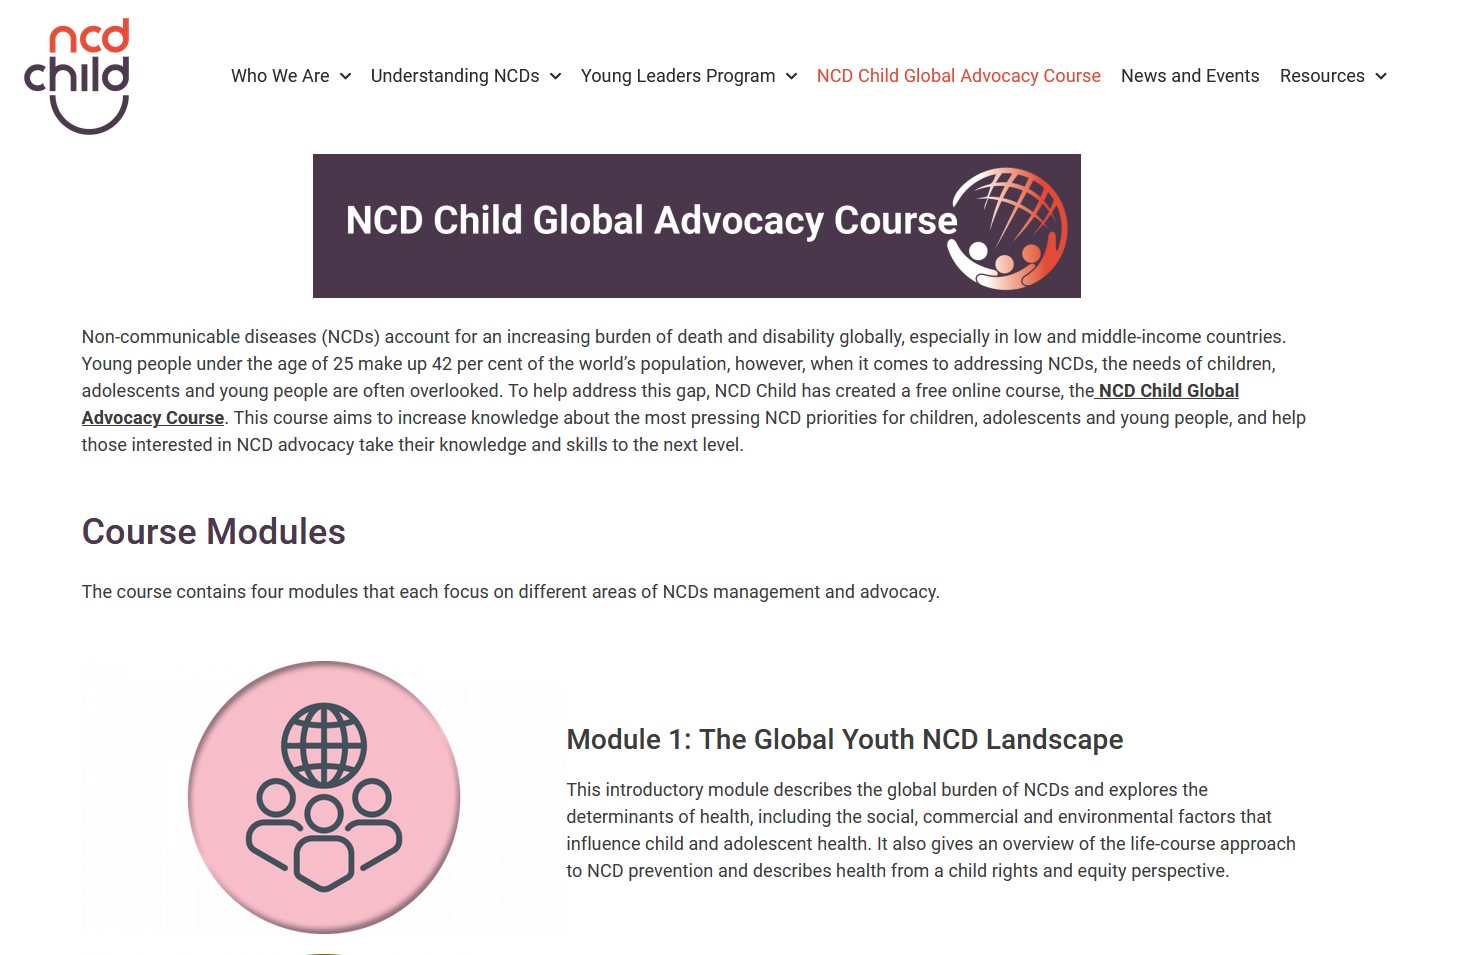 NCD Child Global Advocacy Course